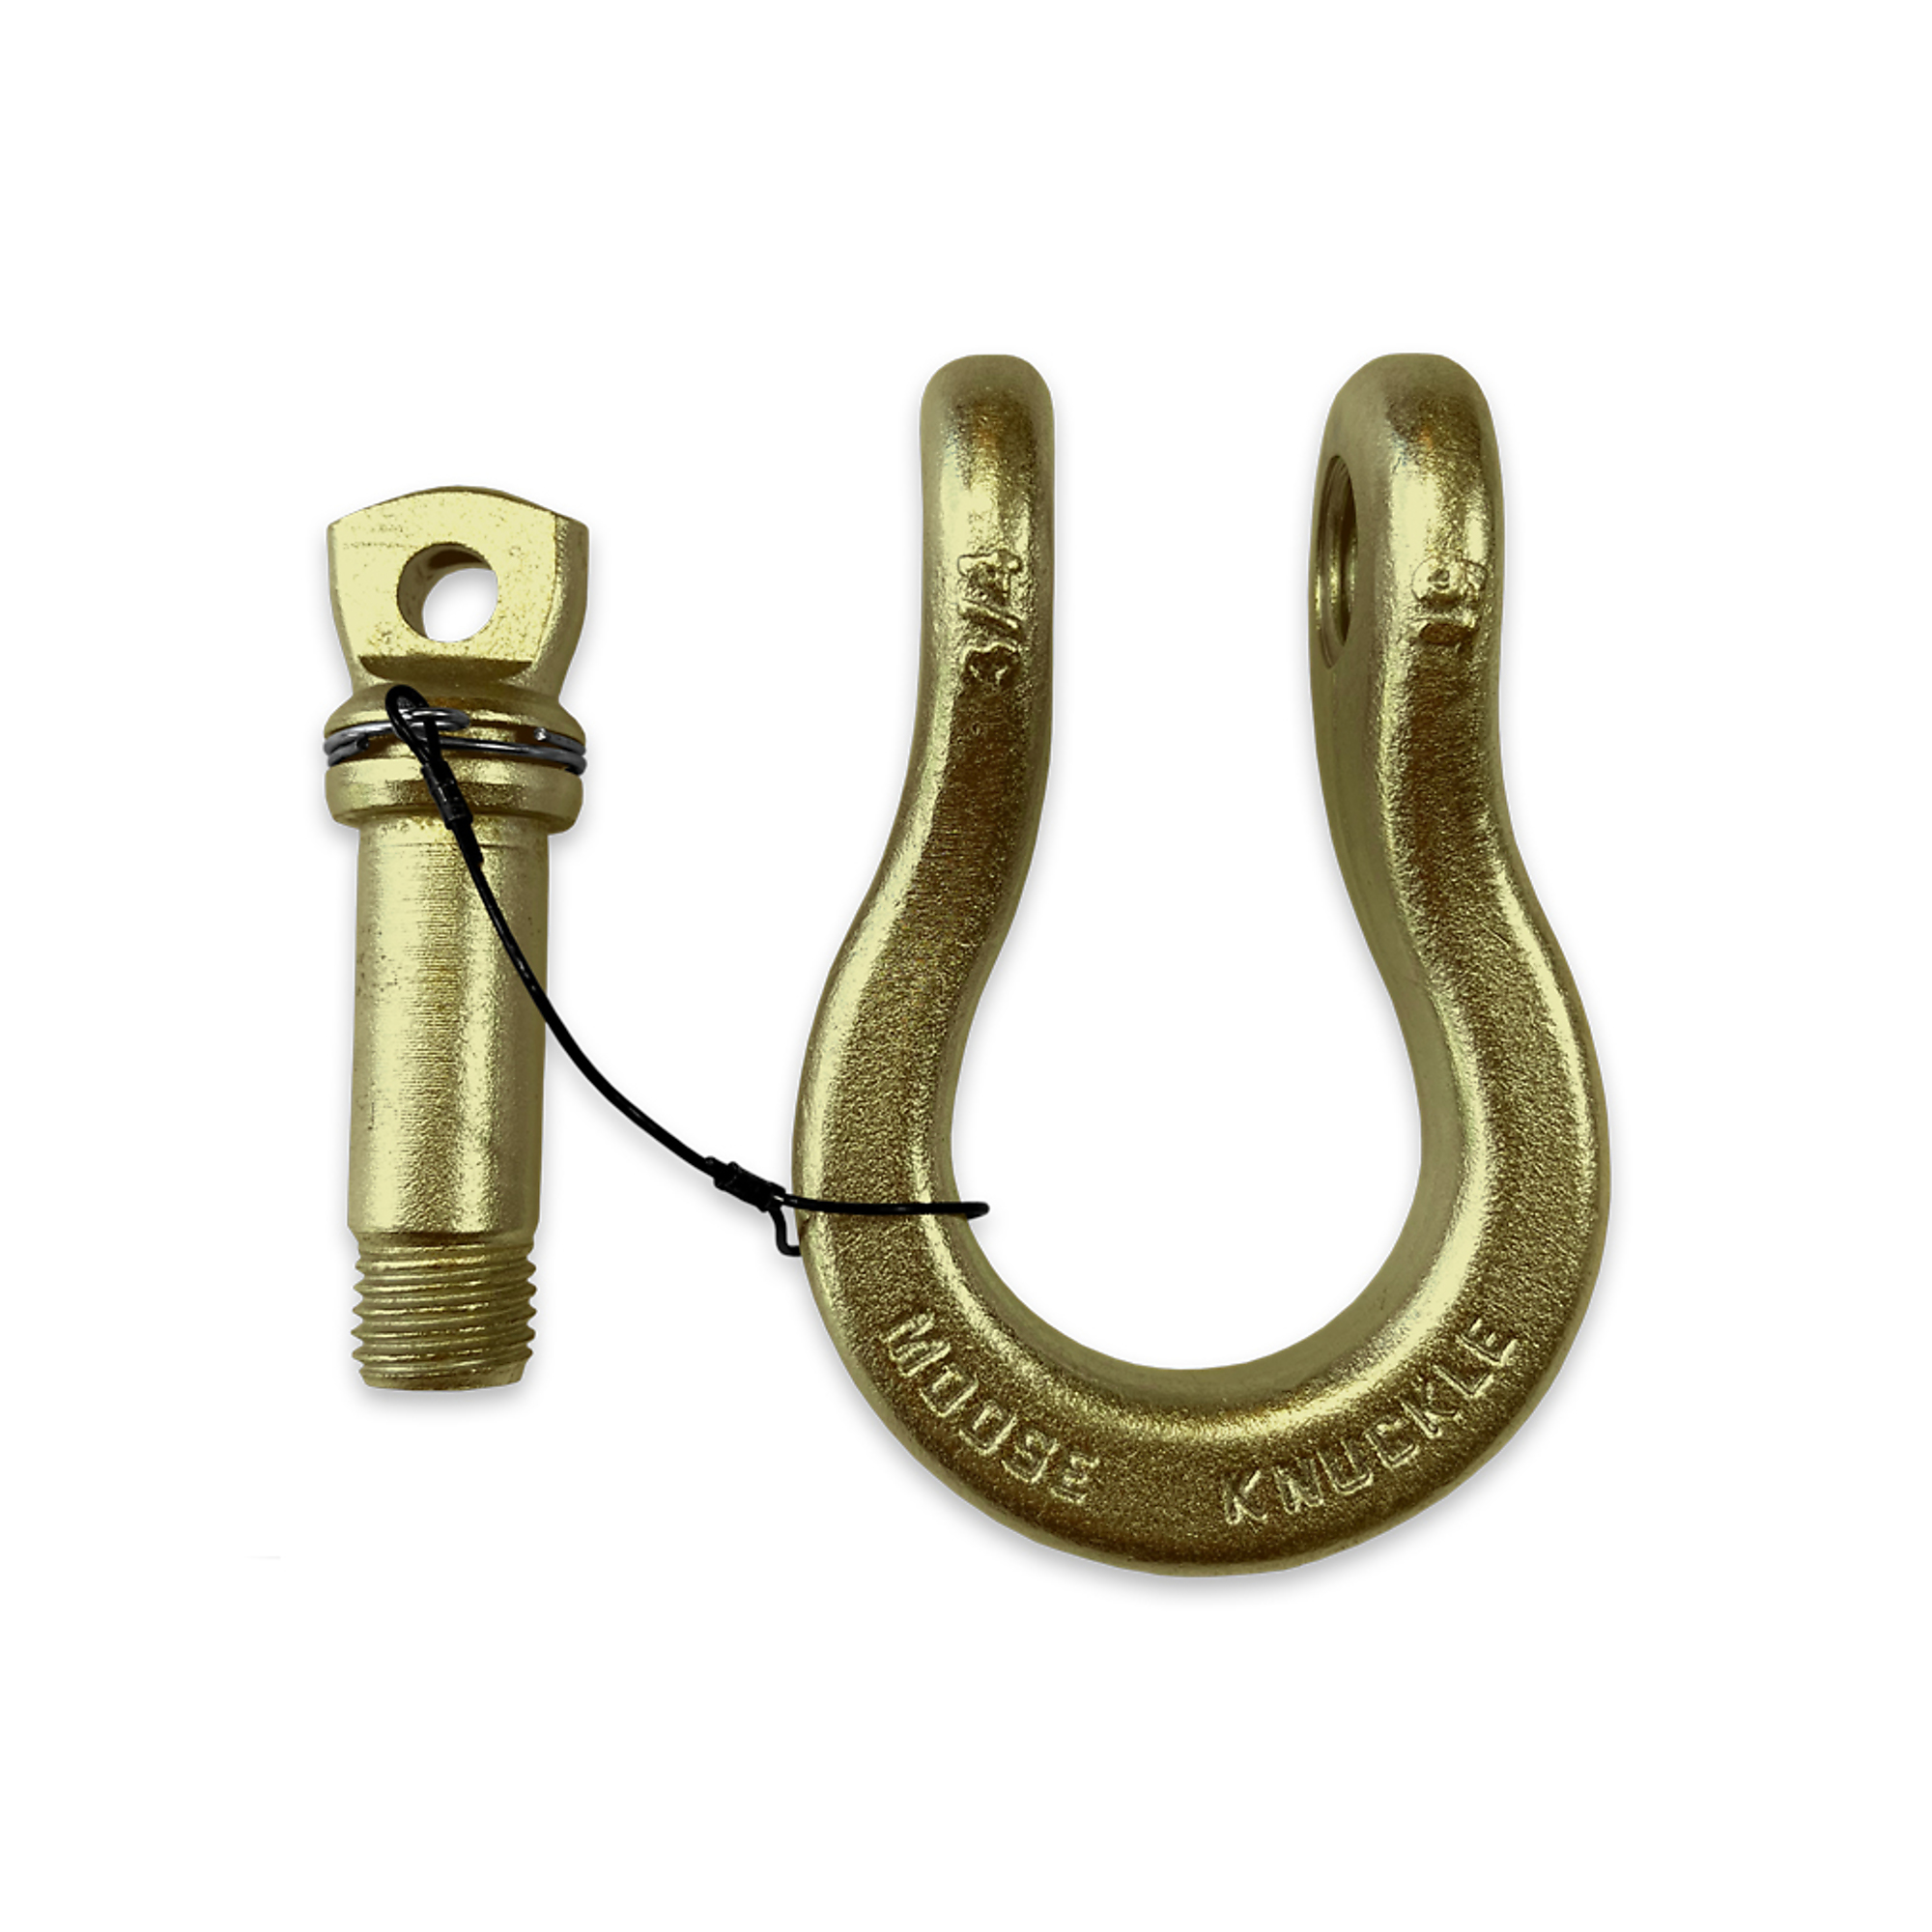 Moose Knuckle Offroad, Brass Knuckle Recovery Tow Lanyard Spin Pin 3/4  Shackle, Working Load Limit 10000 lb, Model# FN000023-012